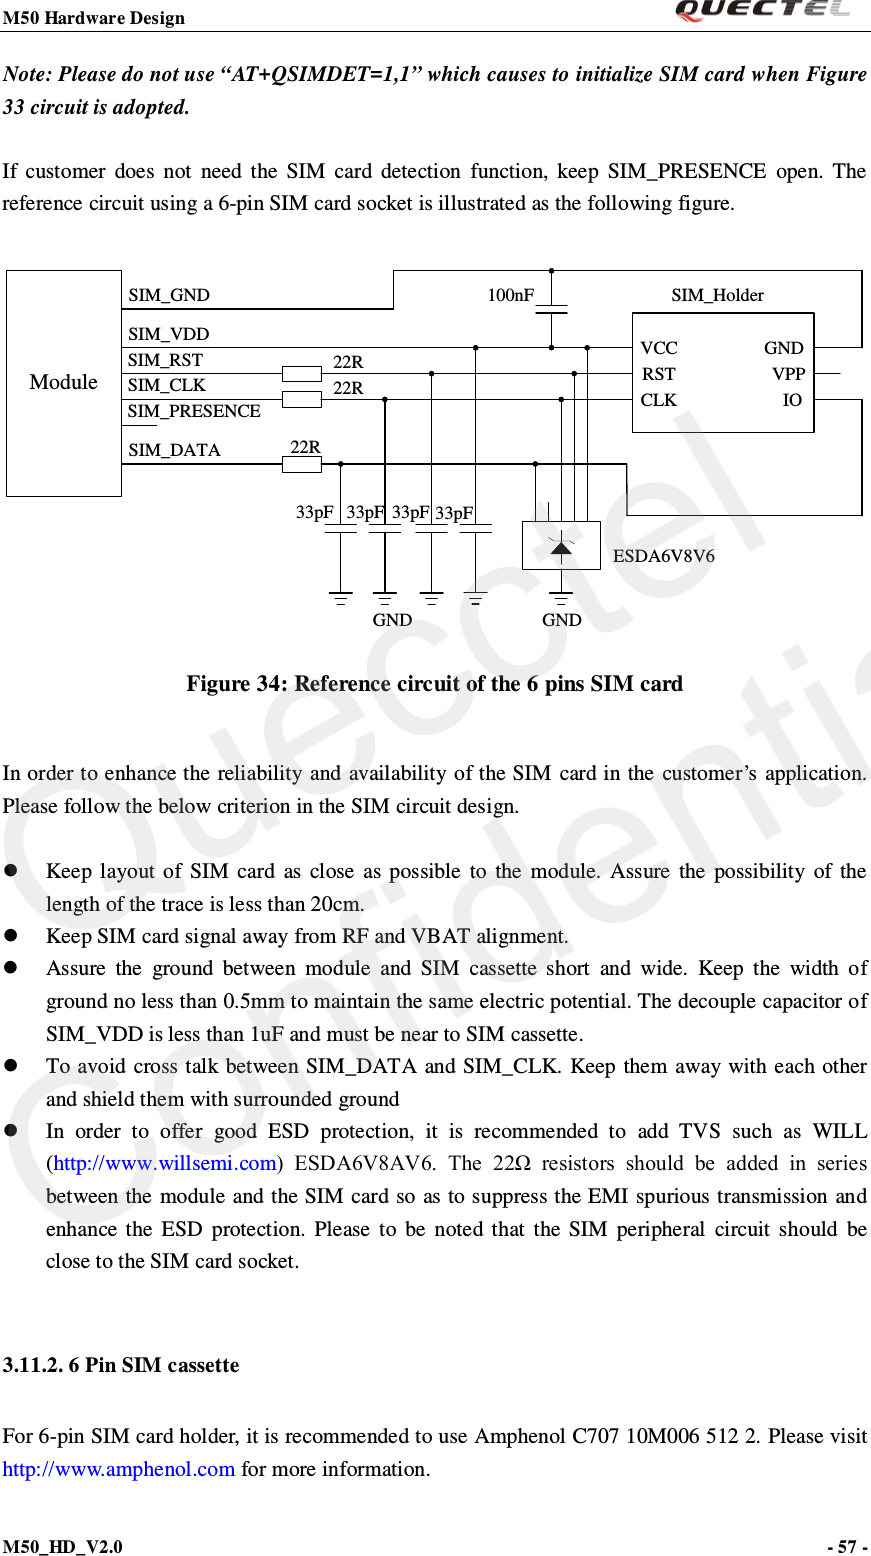 M50 Hardware Design                                                                M50_HD_V2.0                                                                      - 57 -   Note: Please do not use “AT+QSIMDET=1,1” which causes to initialize SIM card when Figure 33 circuit is adopted.    If customer does  not need the SIM card detection function, keep SIM_PRESENCE open. The reference circuit using a 6-pin SIM card socket is illustrated as the following figure.  ModuleSIM_VDDSIM_GNDSIM_RSTSIM_CLKSIM_DATASIM_PRESENCE22R22R22R100nF SIM_HolderGNDESDA6V8V633pF33pF 33pF 33pFVCCRSTCLK IOVPPGNDGND Figure 34: Reference circuit of the 6 pins SIM card  In order to enhance the reliability and availability of the SIM card in the customer’s application. Please follow the below criterion in the SIM circuit design.   Keep layout of SIM card as close as possible to the  module.  Assure the possibility of the length of the trace is less than 20cm.    Keep SIM card signal away from RF and VBAT alignment.  Assure the ground between module and SIM cassette short and wide. Keep the width of ground no less than 0.5mm to maintain the same electric potential. The decouple capacitor of SIM_VDD is less than 1uF and must be near to SIM cassette.    To avoid cross talk between SIM_DATA and SIM_CLK.  Keep them away with each other and shield them with surrounded ground    In order to offer good ESD protection, it is recommended to add TVS such as WILL (http://www.willsemi.com)  ESDA6V8AV6.  The  22Ω  resistors  should  be  added  in  series between the module and the SIM card so as to suppress the EMI spurious transmission and enhance the ESD protection. Please to be noted  that the SIM peripheral circuit should be close to the SIM card socket.  3.11.2. 6 Pin SIM cassette For 6-pin SIM card holder, it is recommended to use Amphenol C707 10M006 512 2. Please visit http://www.amphenol.com for more information. Quecctel Confidential